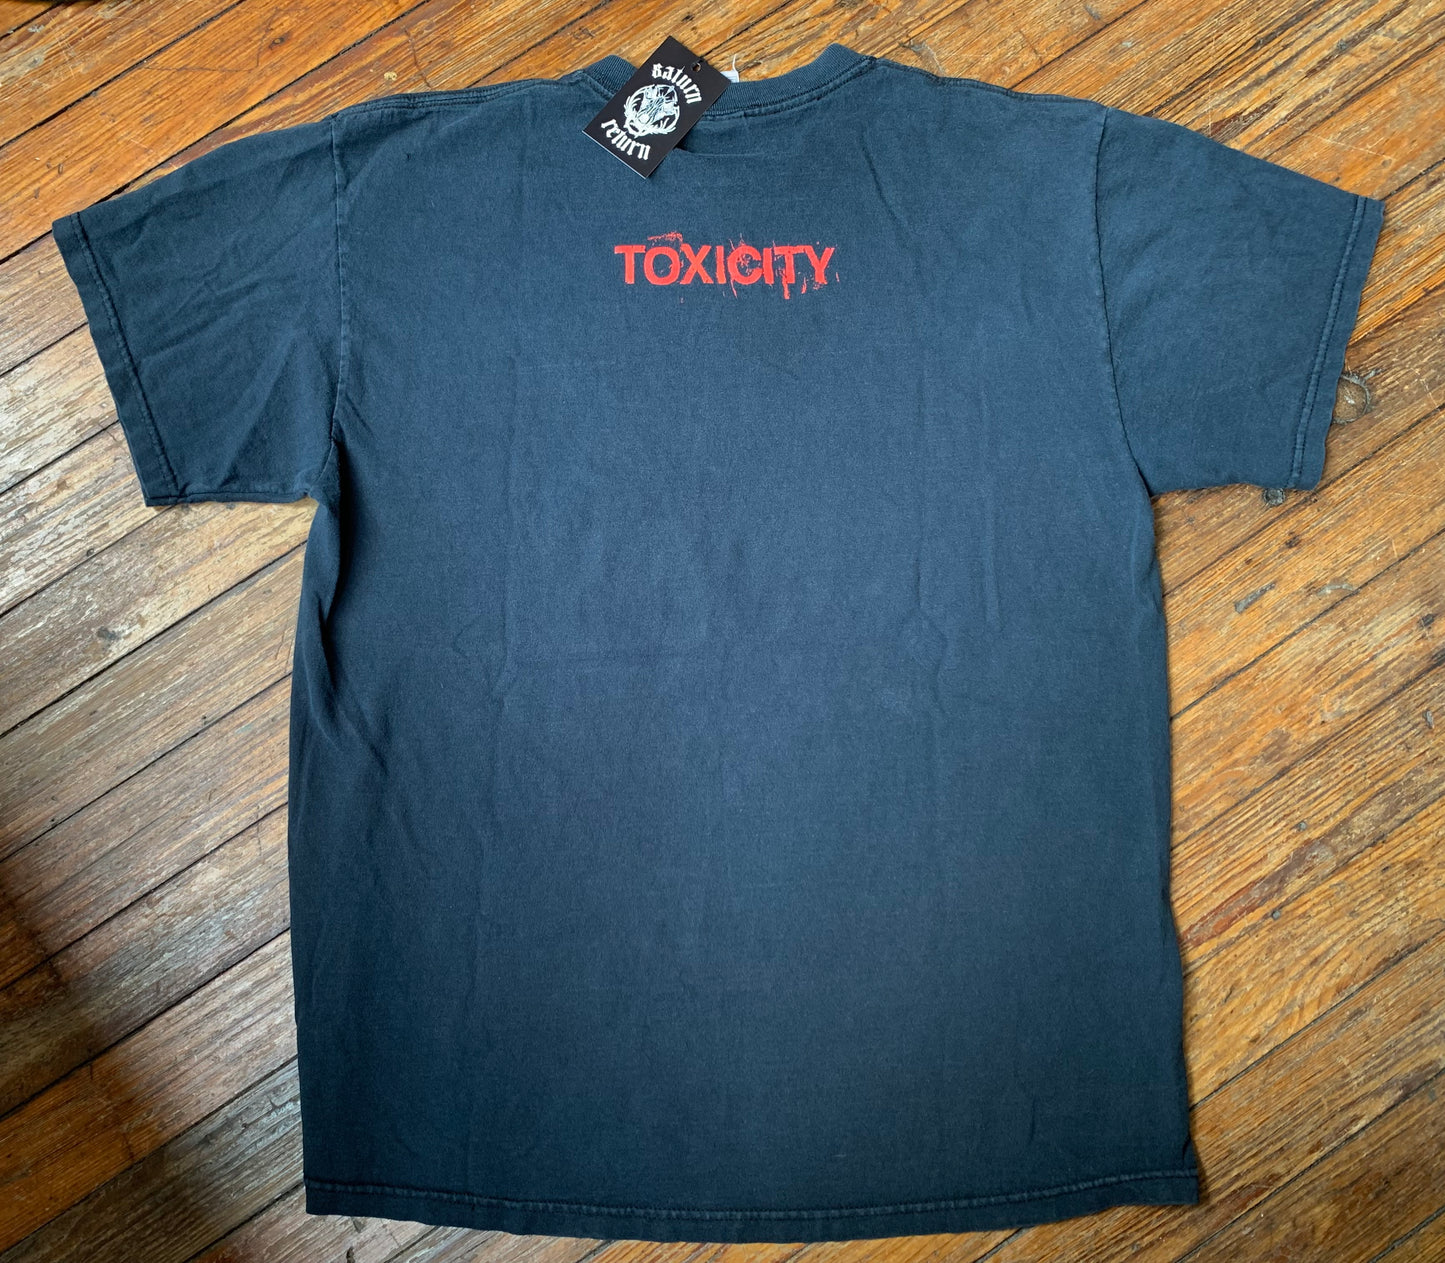 Vintage 2001 System of a Down Toxicity T-Shirt